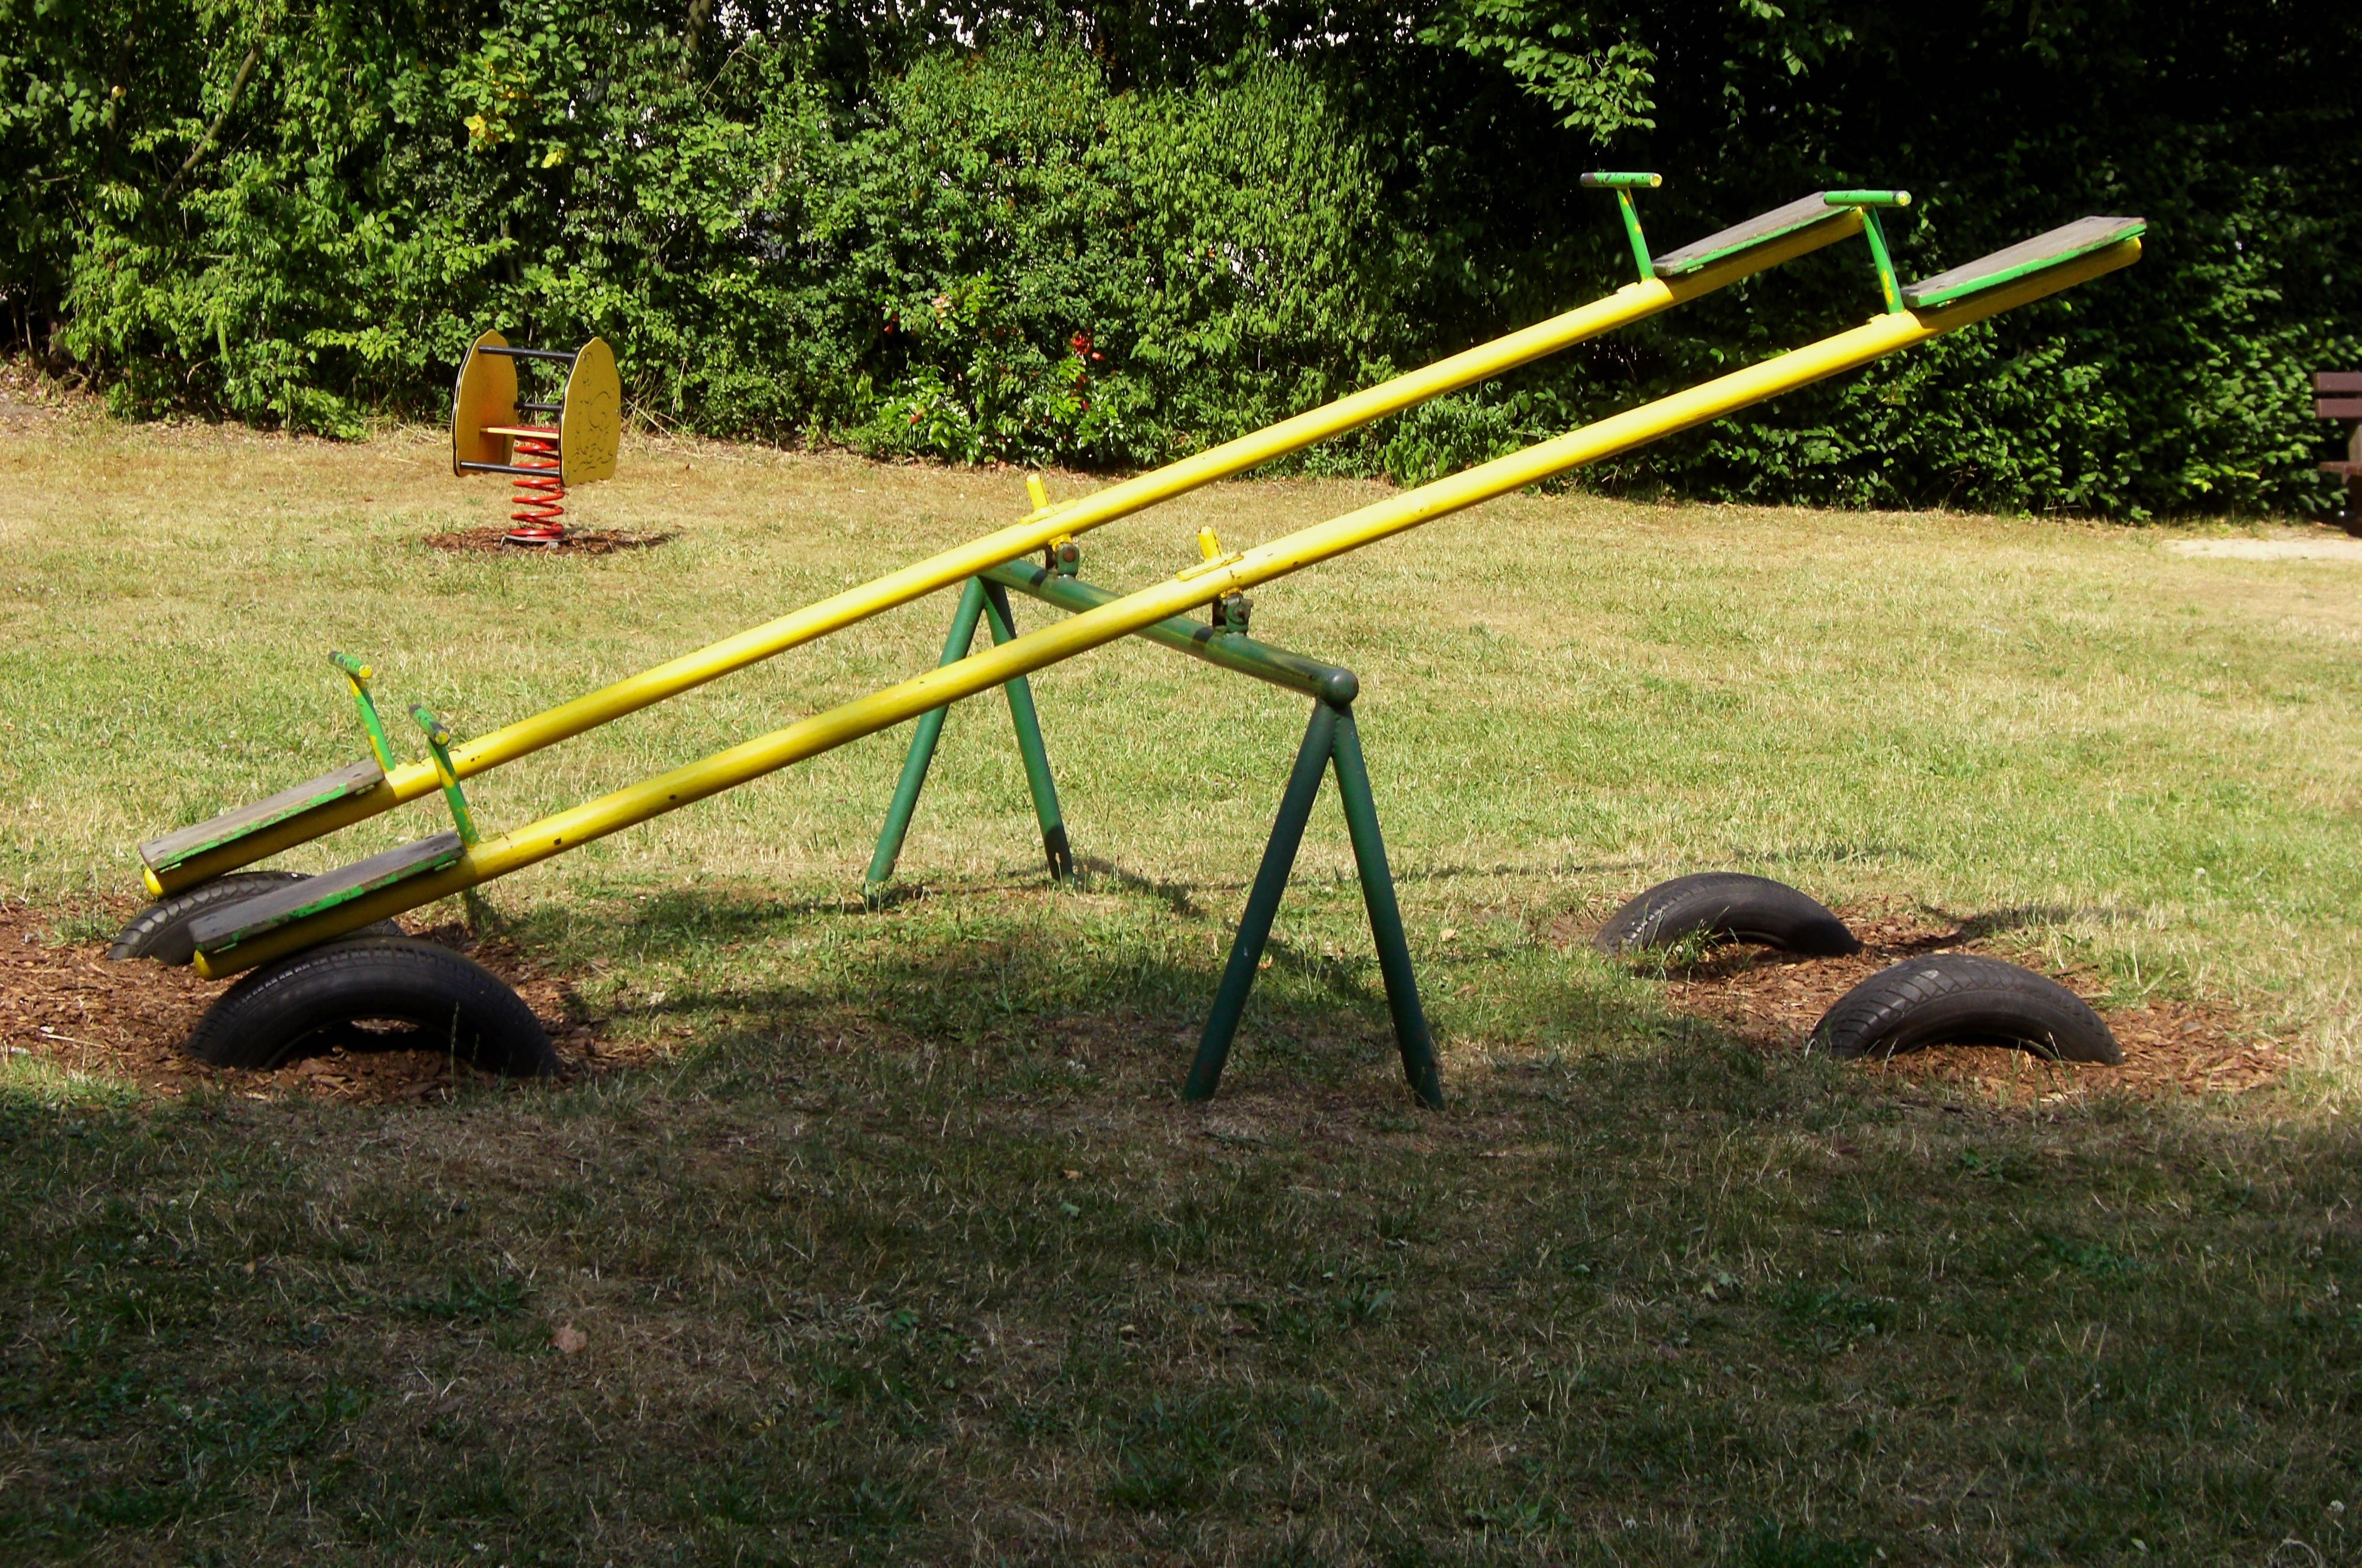 2 yellow and green seesaws